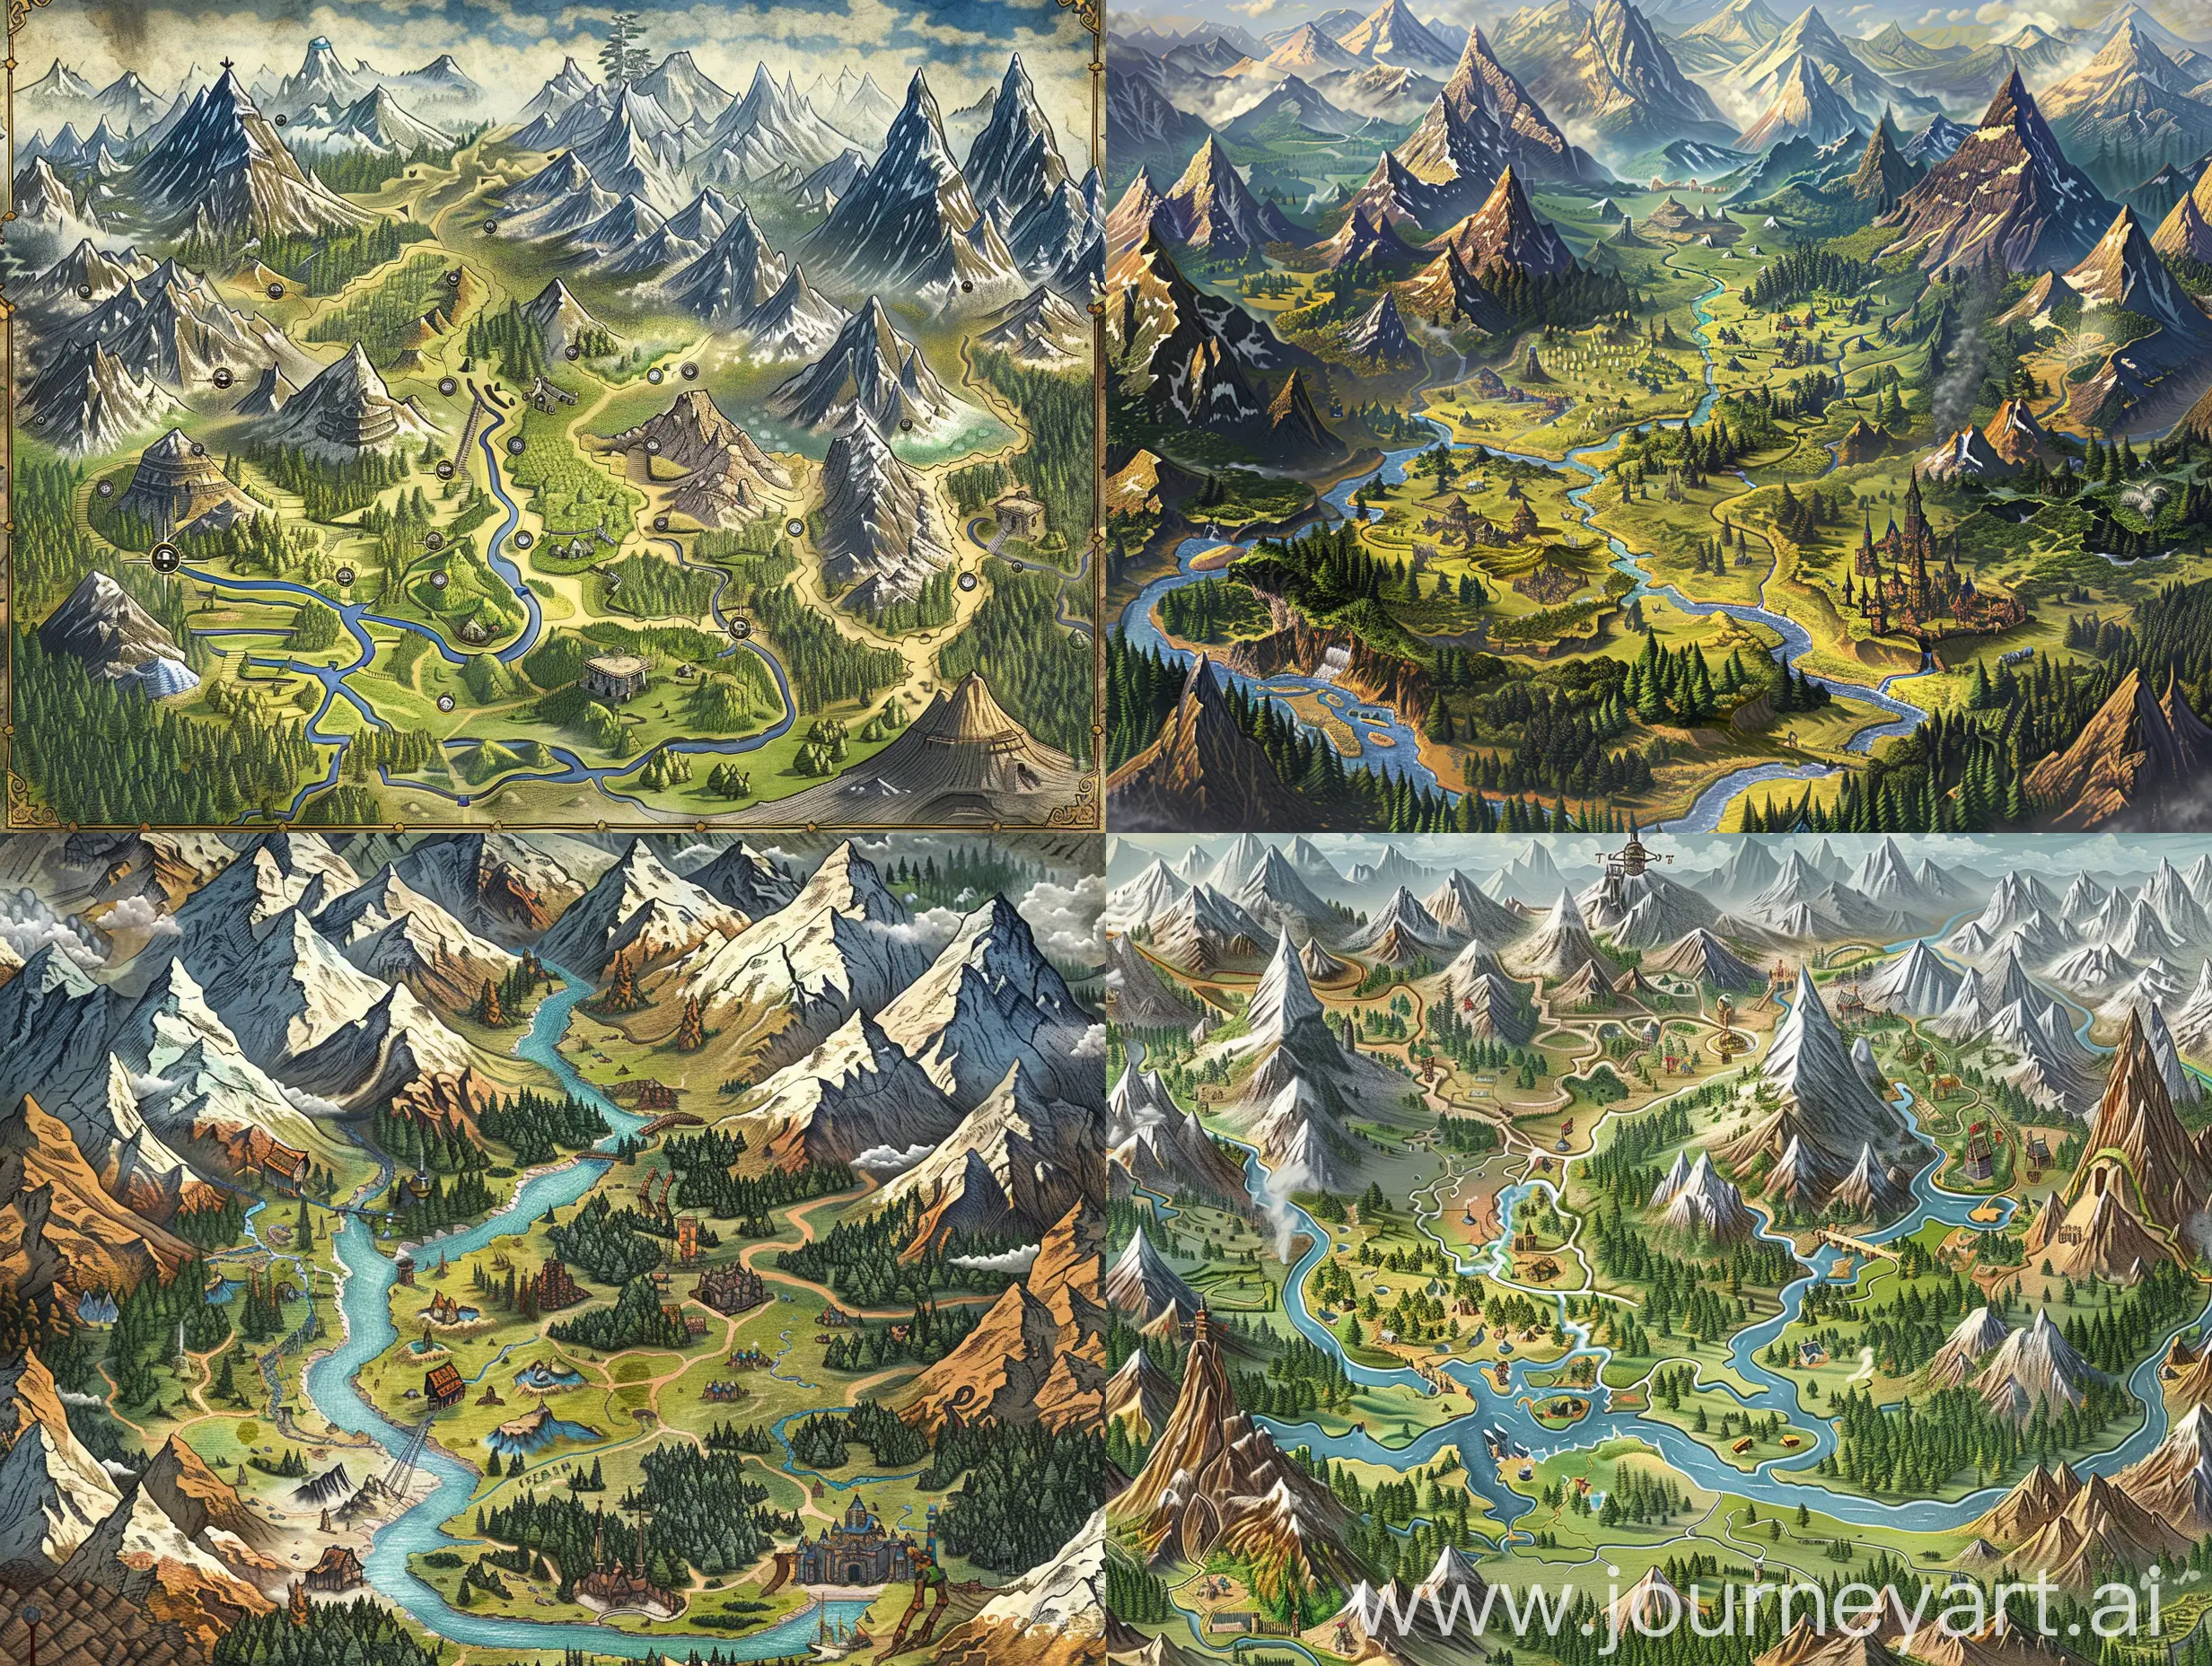 fantasy game world map, inspired by classic tales of epic adventures. This digital art piece features a diverse landscape with towering mountains, winding rivers, verdant forests, and elusive hidden realms. Each location possesses a unique character, hinting at ominous, mystical, and tranquil settings. The art style is illustrative and painterly, with the detail and depth of a matte painting. The overall mood invites a sense of awe, exploration, and a subtle hint of danger, prompting the viewer to venture deeper into this magical world.